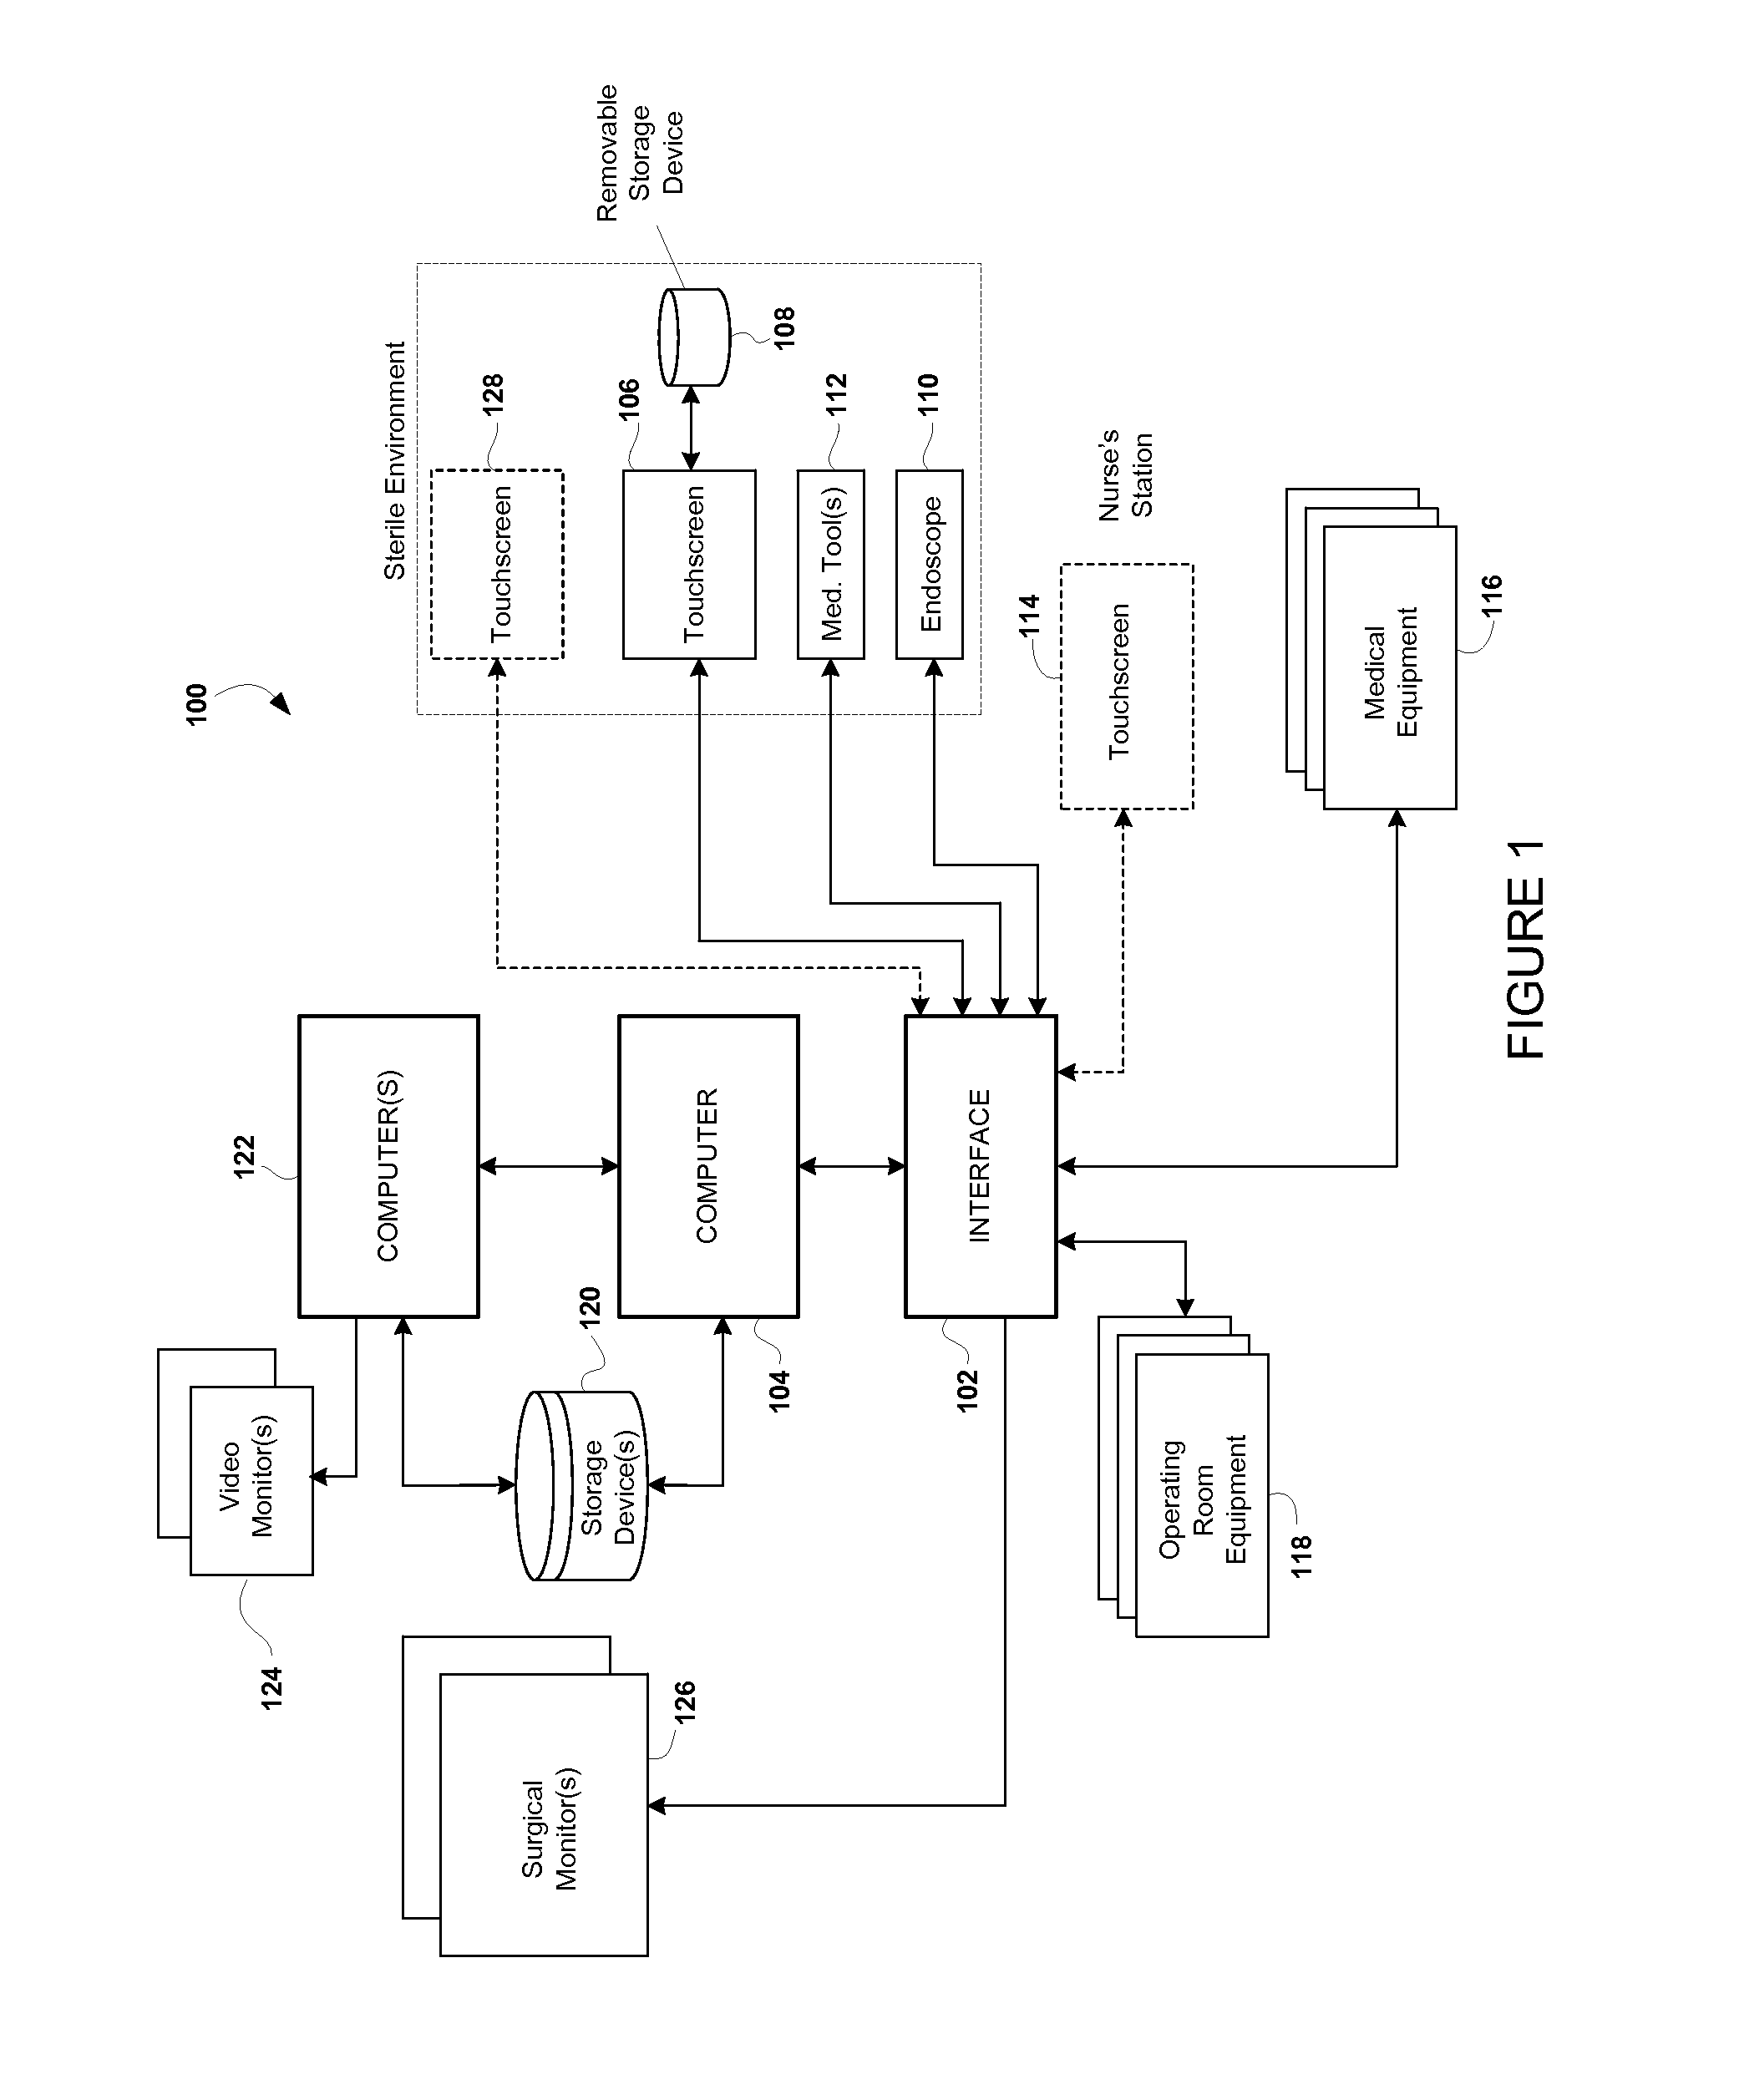 Configurable Control For Operating Room System